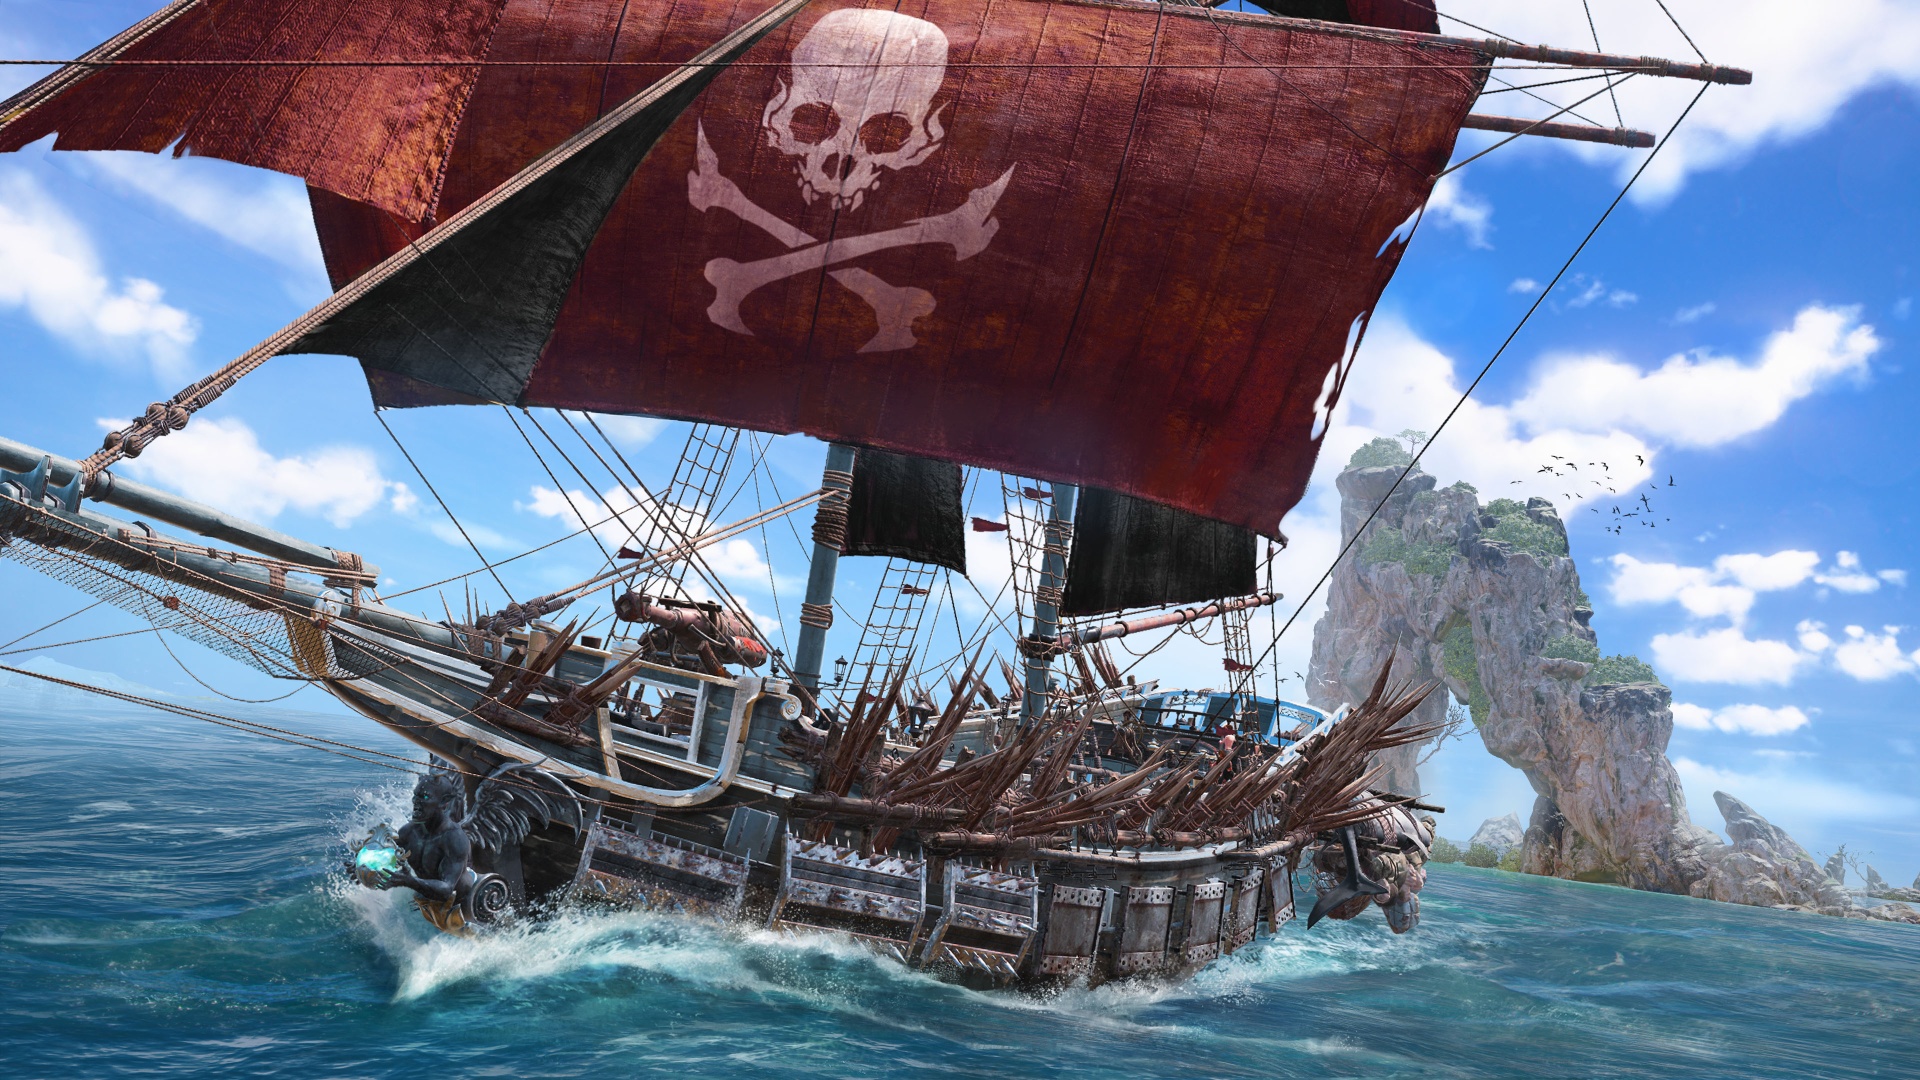 Skull and Bones developers unveiled a new trailer dedicated to naval  battles and ship customization